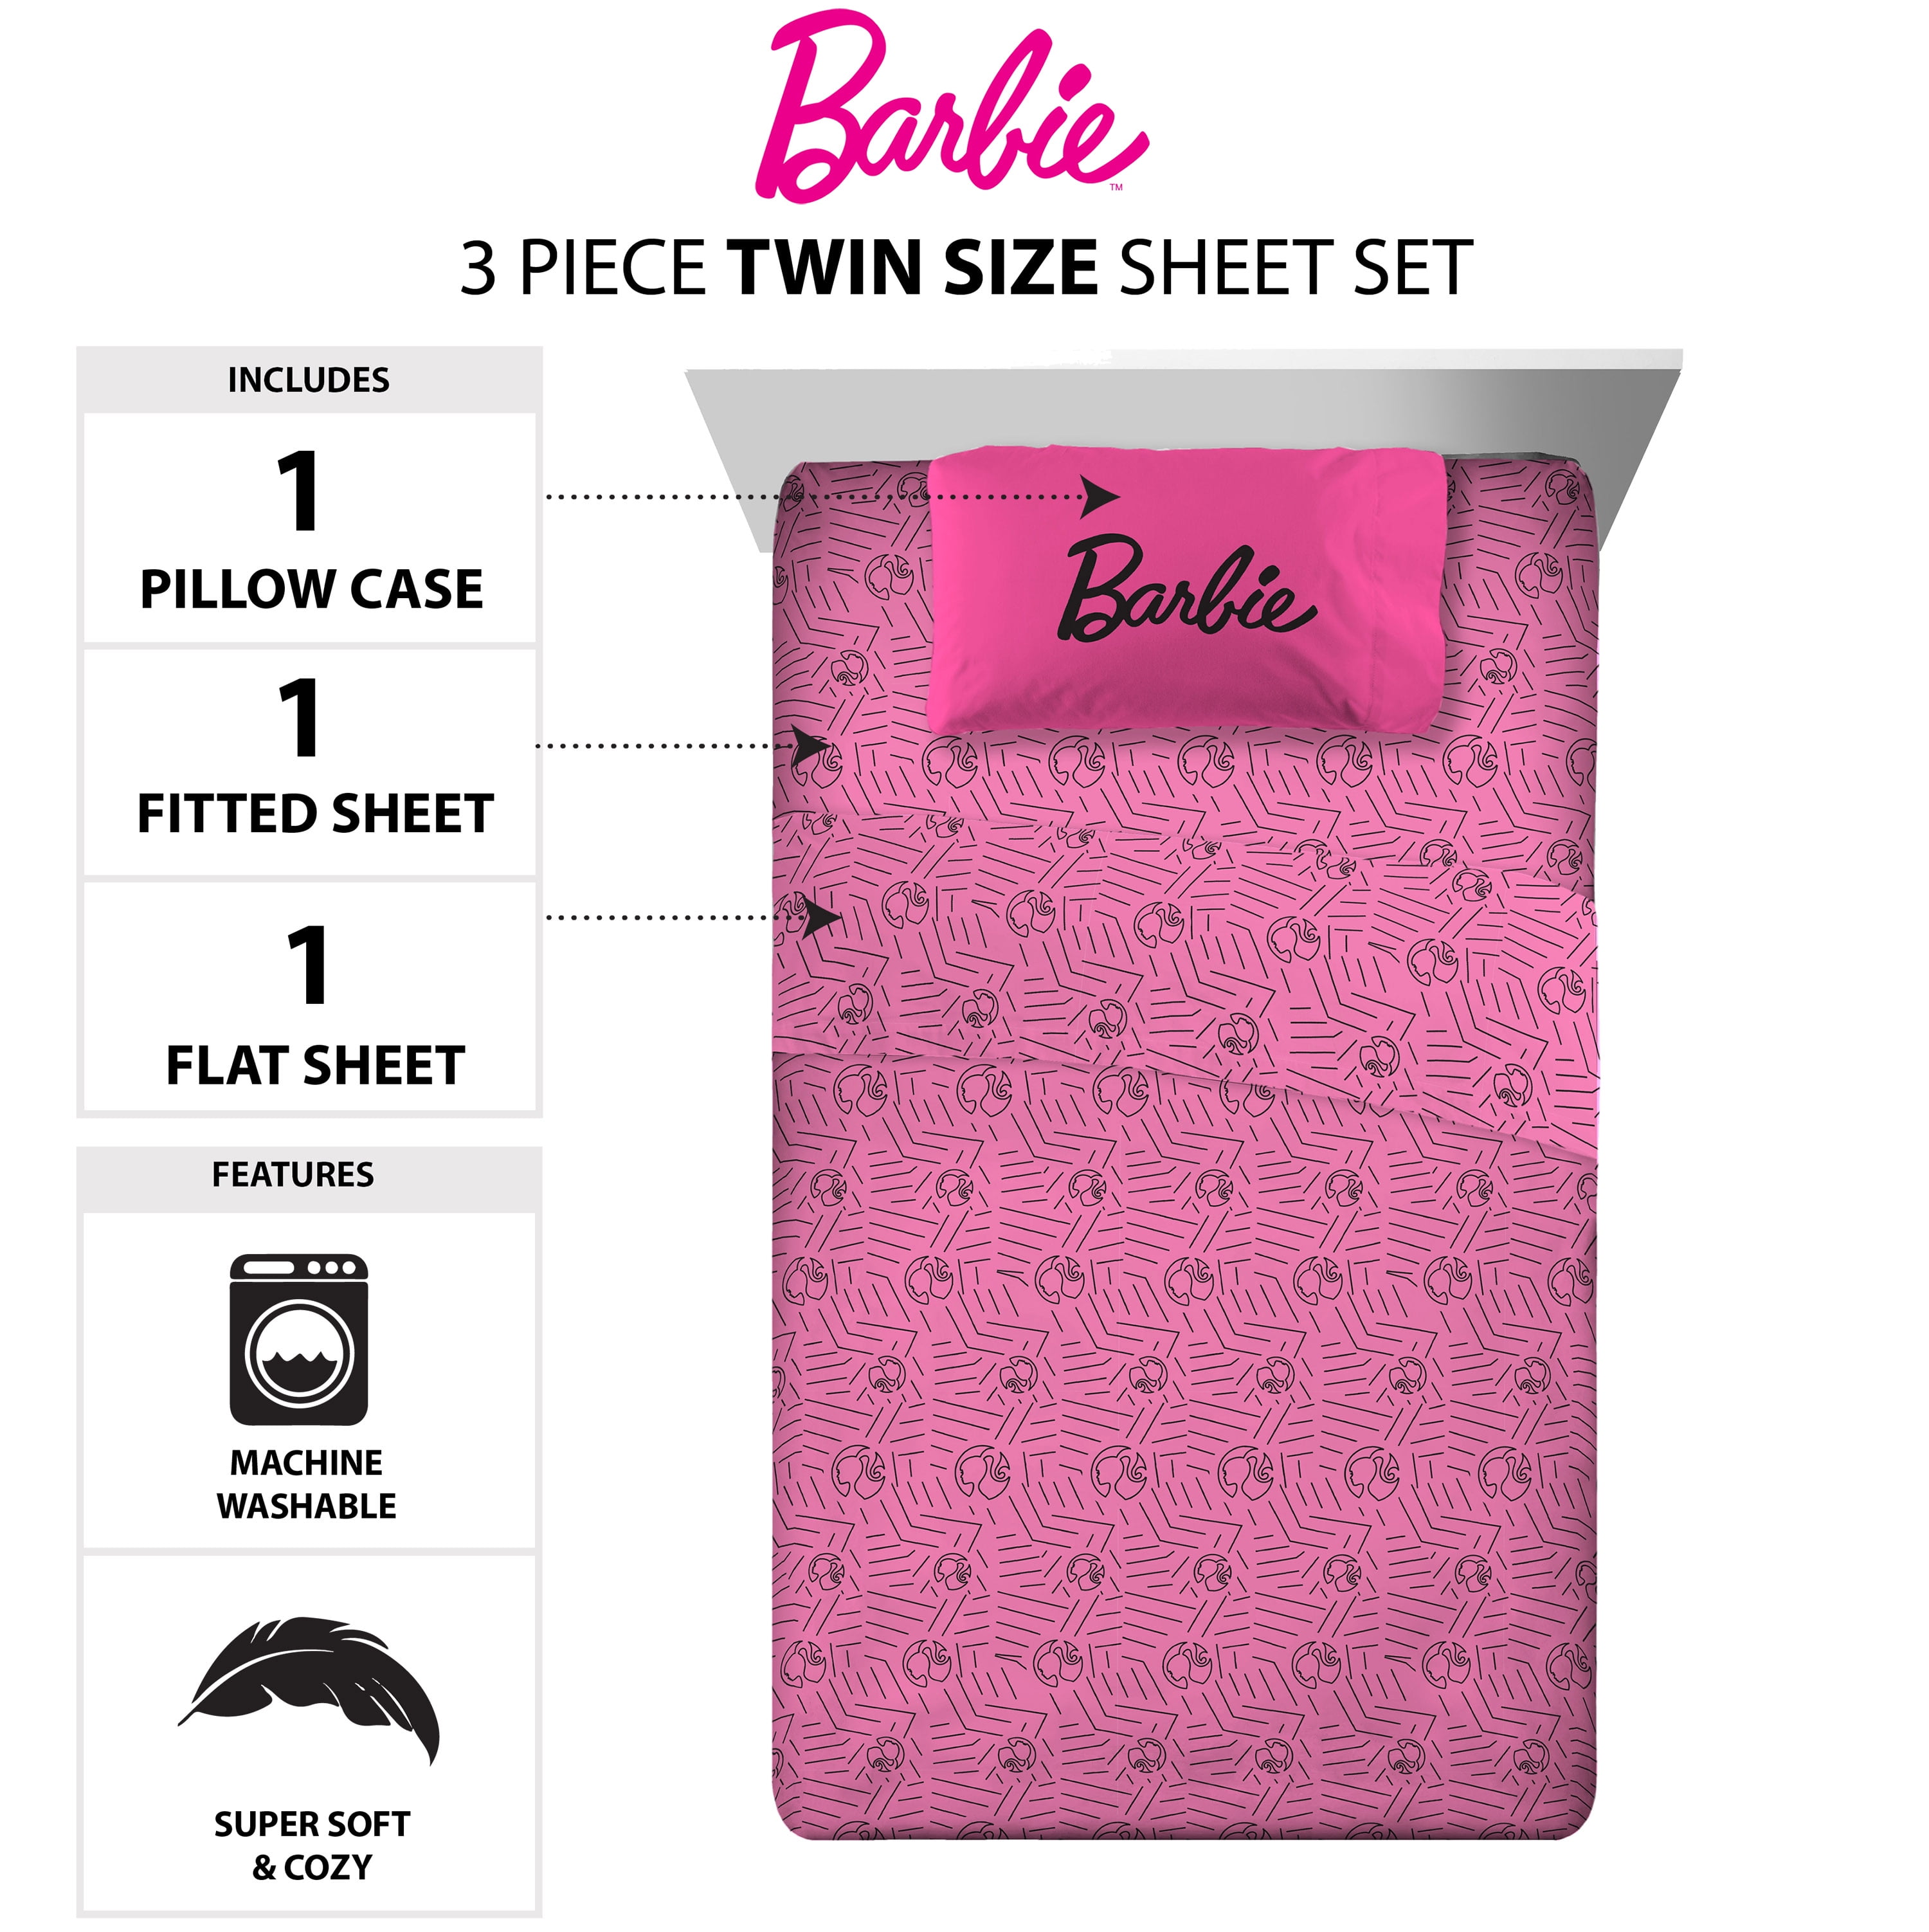 Mattel Barbie TWIN Bed Sheets Flannel 2 Complete Sets Flat Fitted